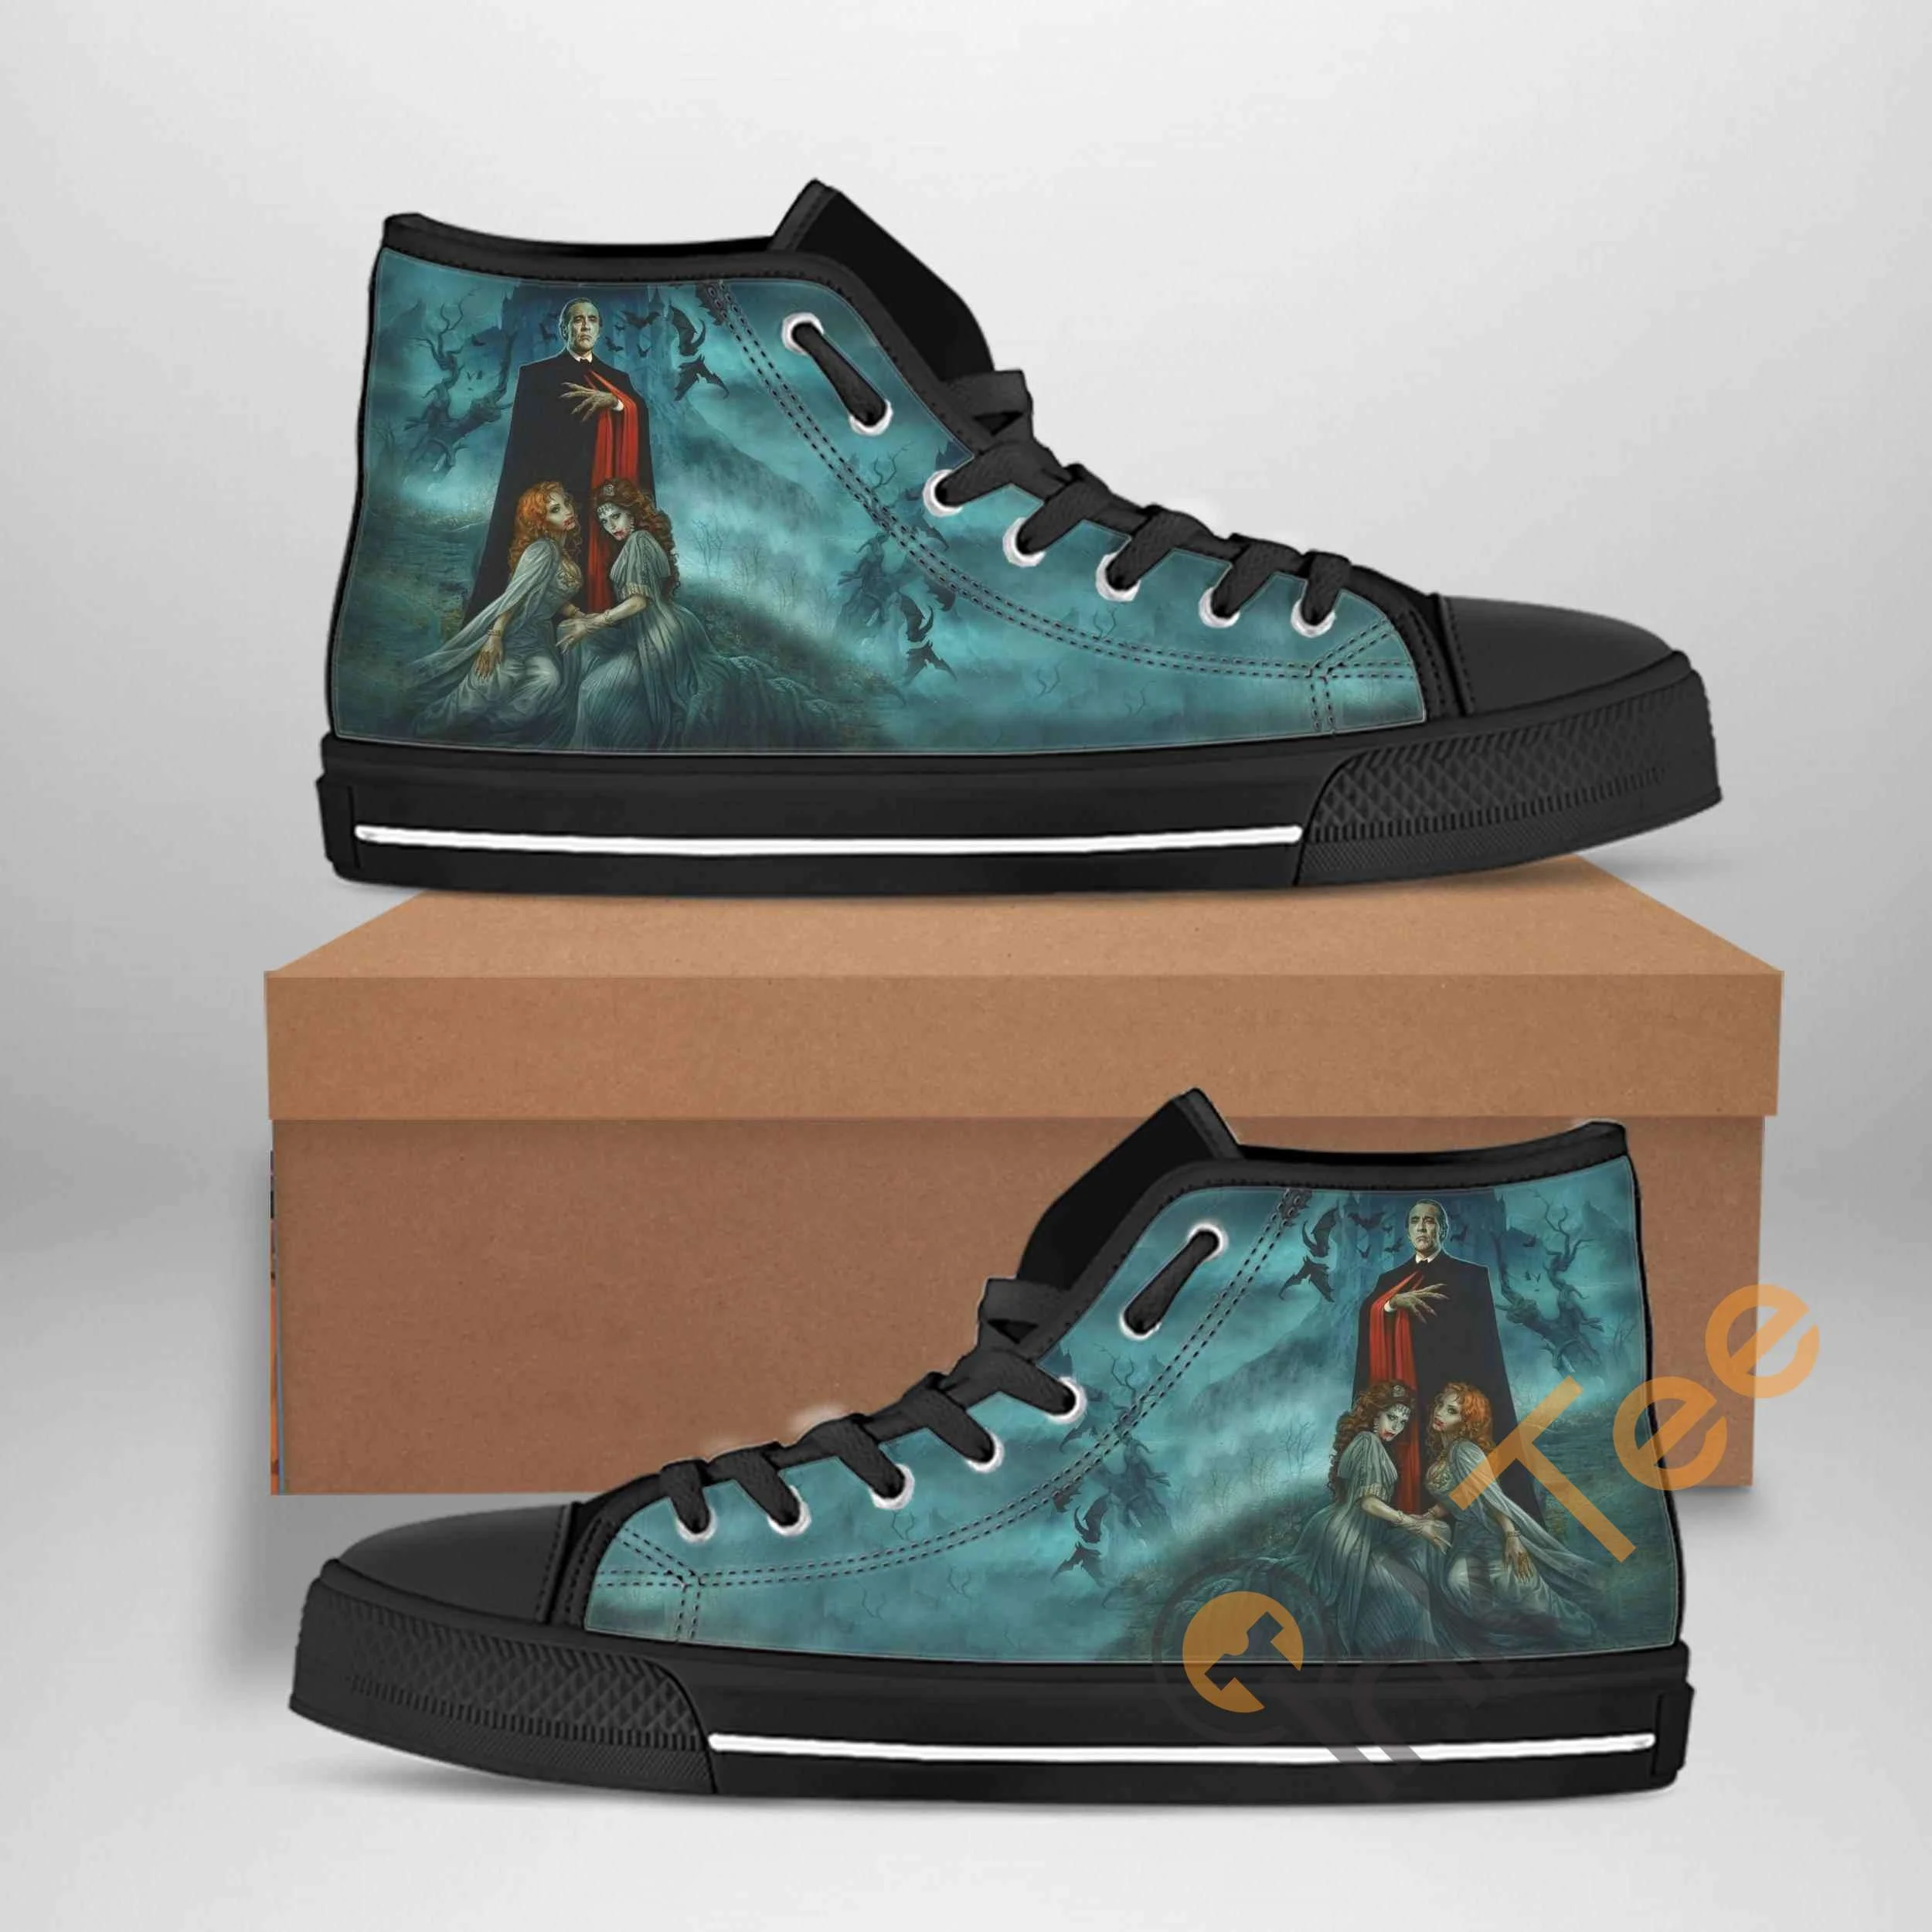 Count Dracula Best Movie Character Amazon Best Seller Sku 1435 High Top Shoes